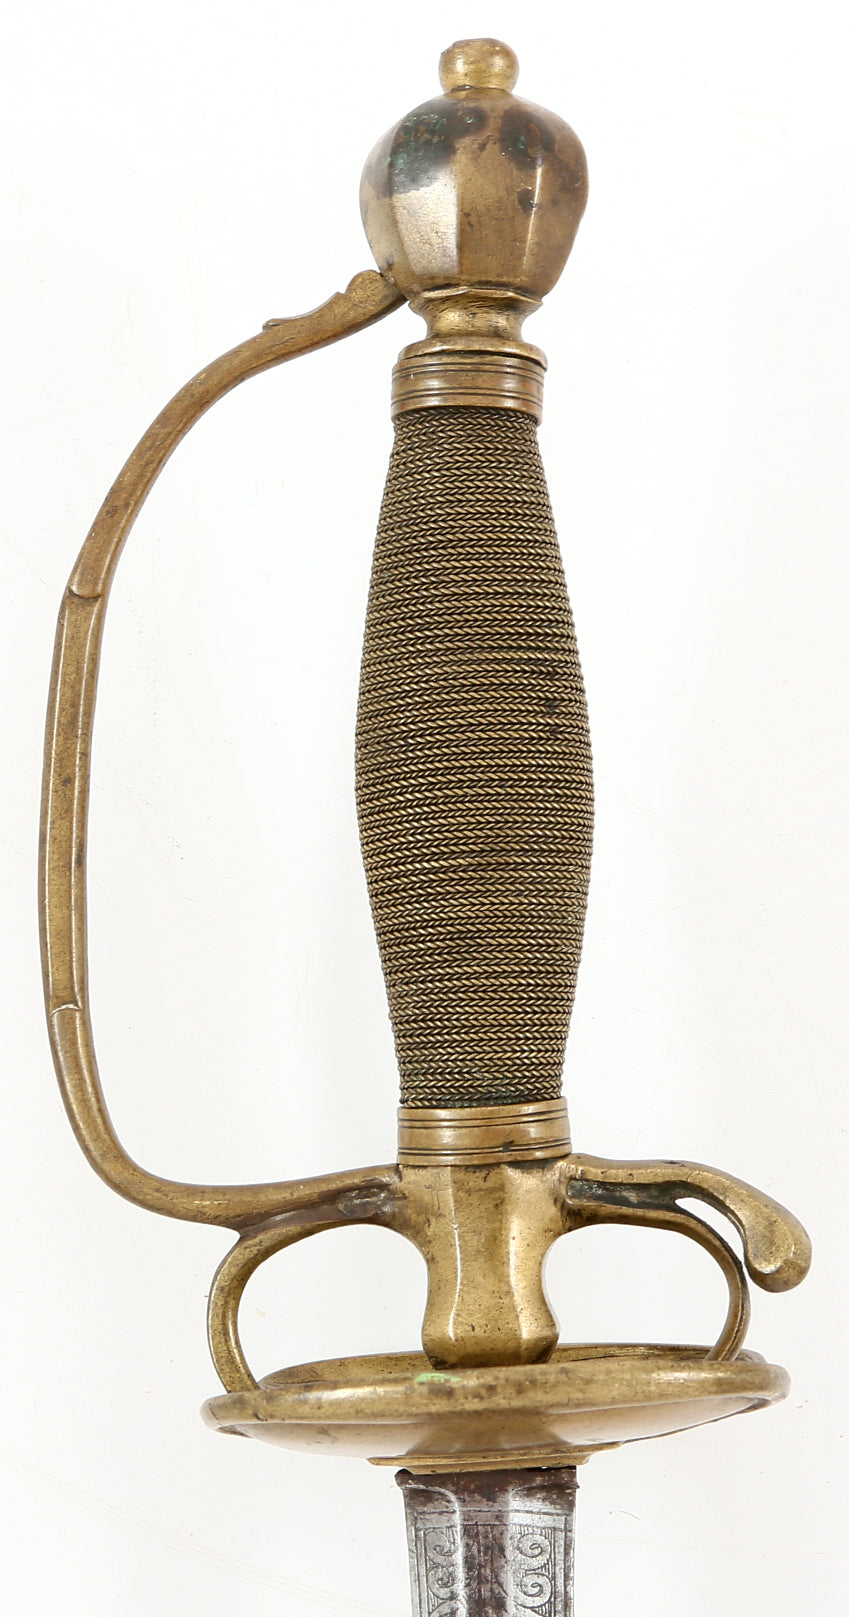 FRENCH INFANTRY SWORD C.1710-40 - Fagan Arms